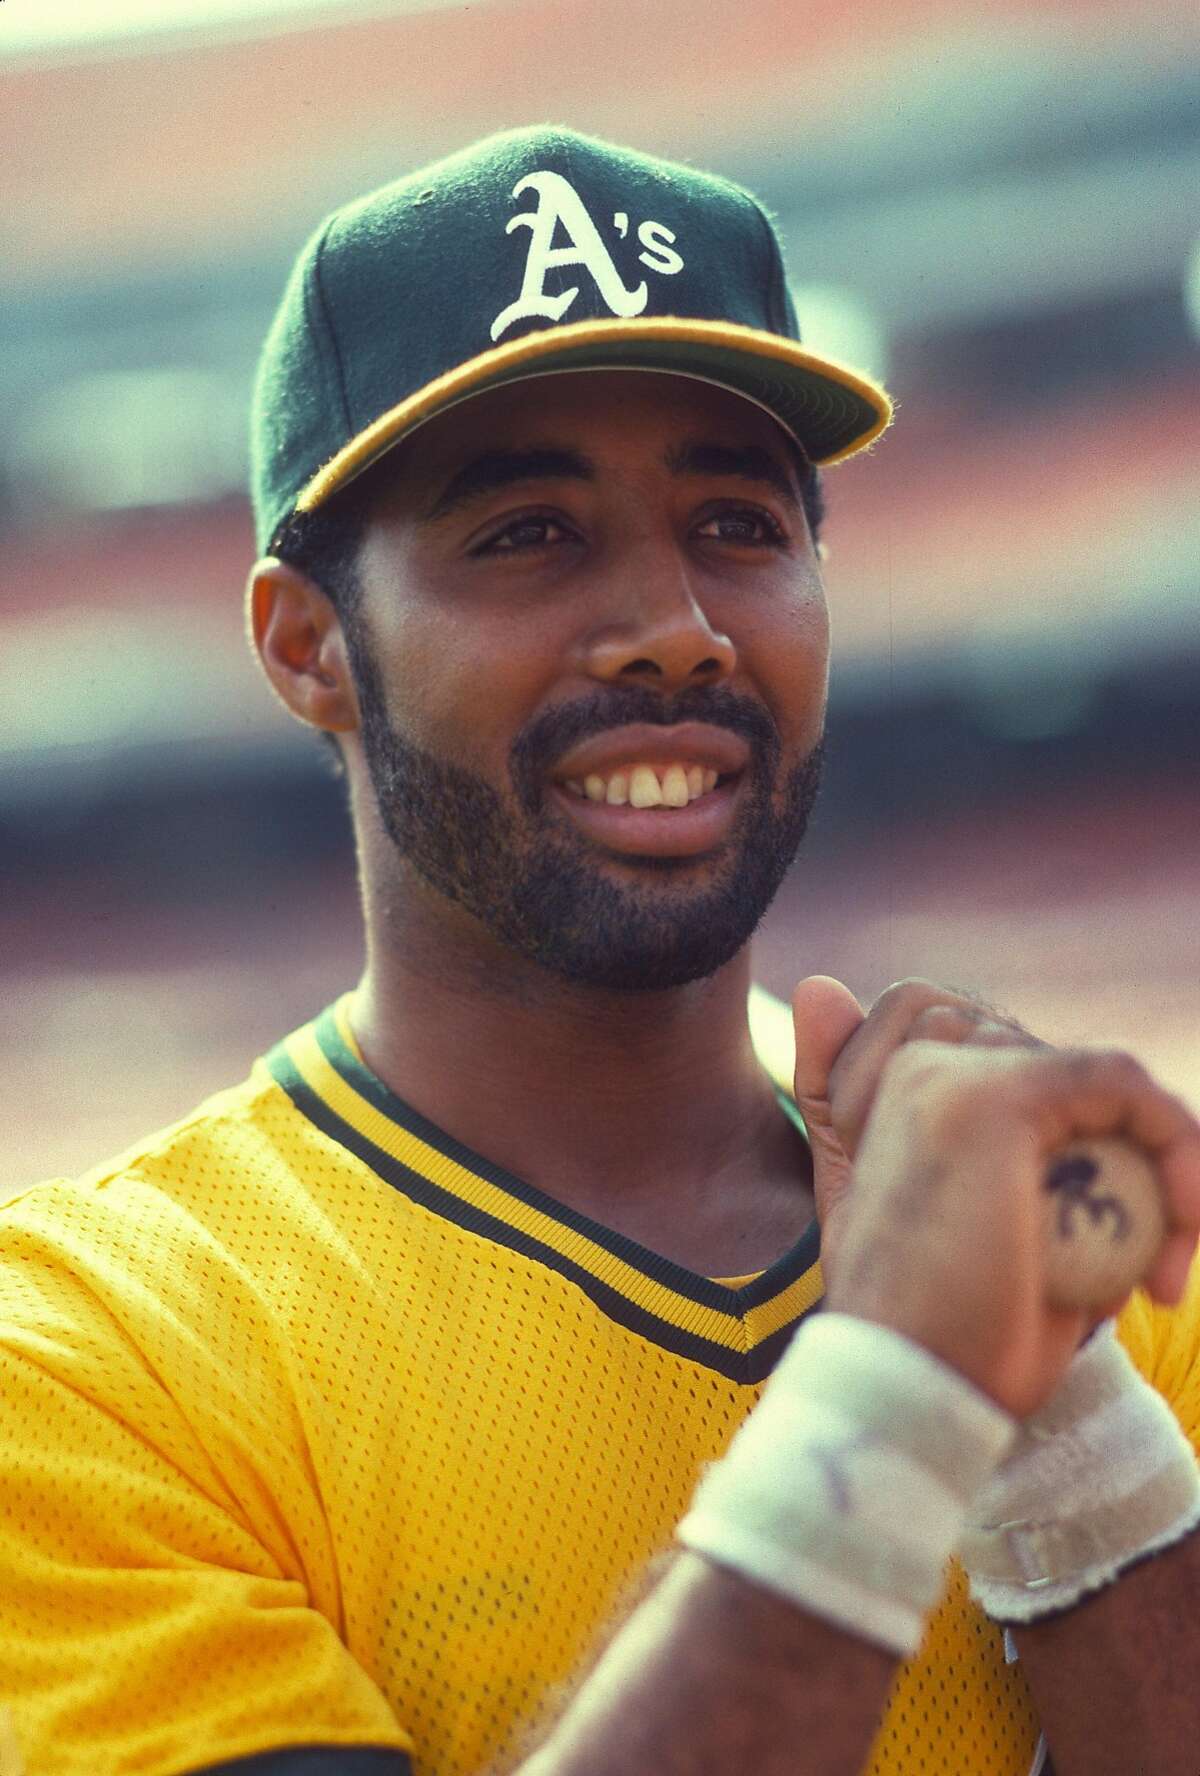 OAKLAND, CA - CIRCA 1991: Harold Baines #3 of the Oakland Athletics looks on during batting practice prior to the start of a Major League Baseball game circa 1991 at the Oakland-Alameda County Coliseum in Oakland, California. Baines played for the Athletics from 1990-92. (Photo by Focus on Sport/Getty Images)